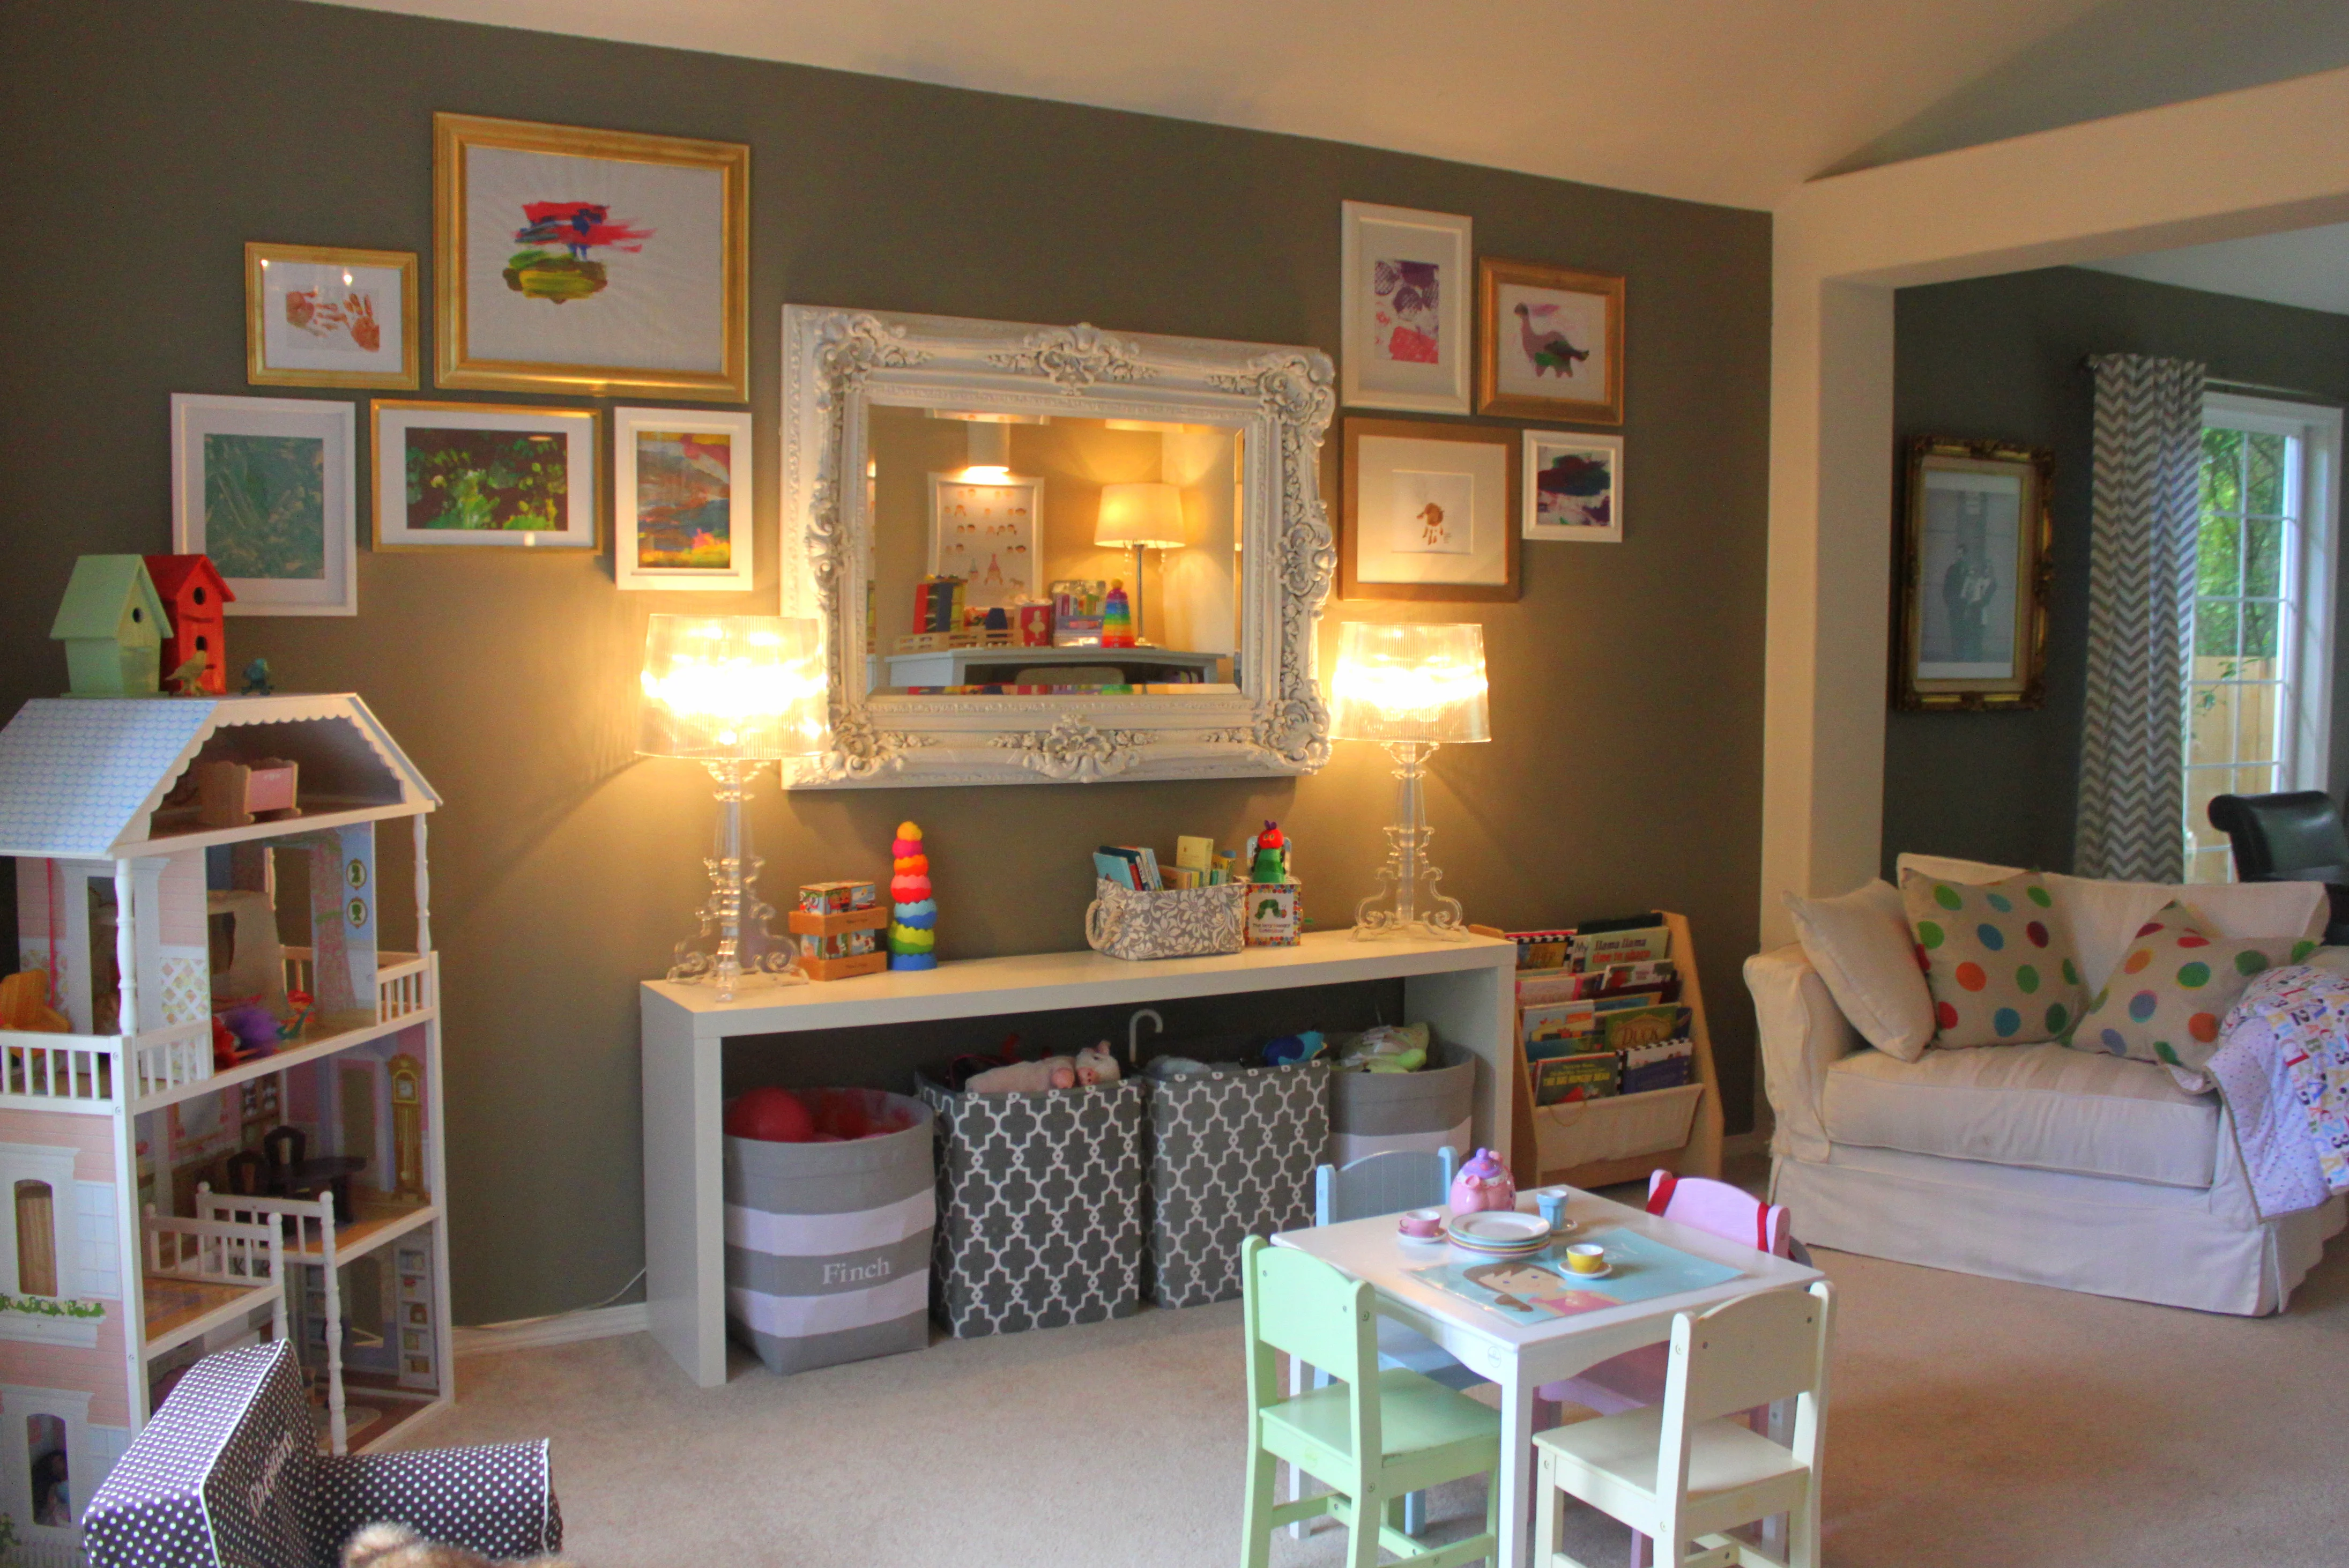 Vintage Chic Playroom View of the Room